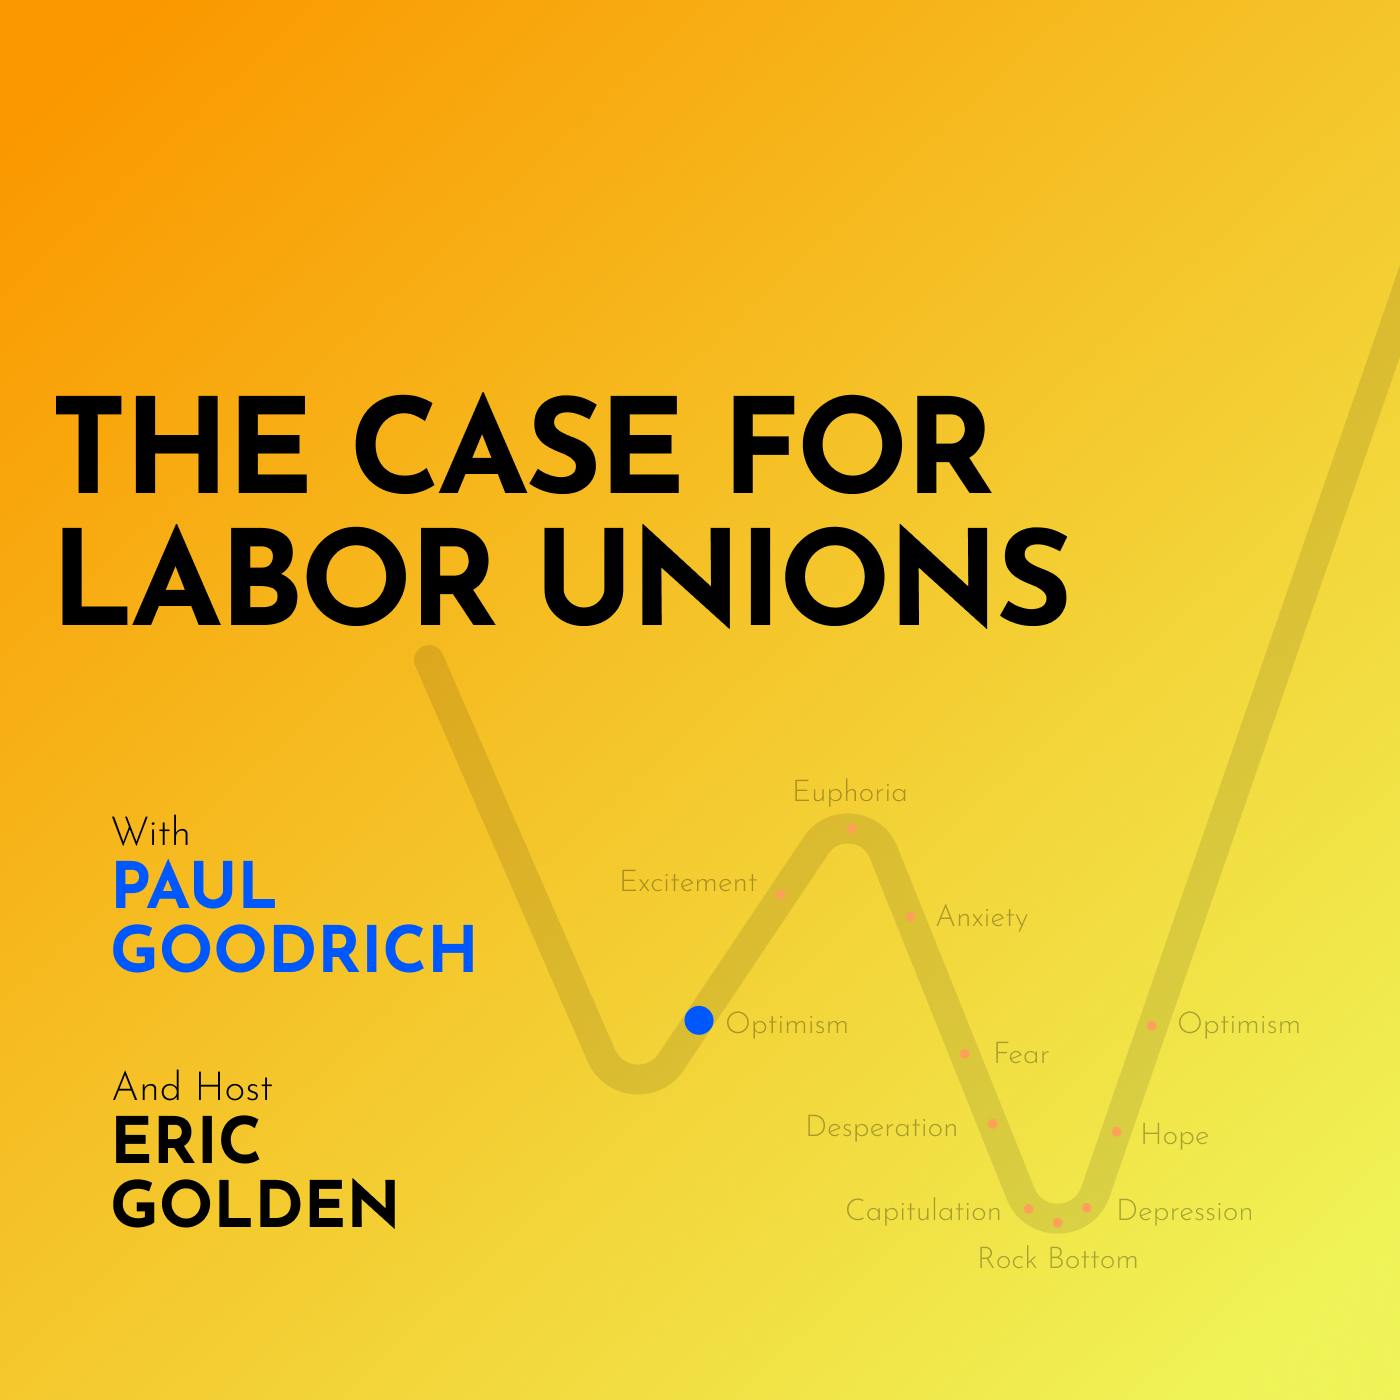 Paul Goodrich: The Case for Labor Unions - [Making Markets, EP.21]